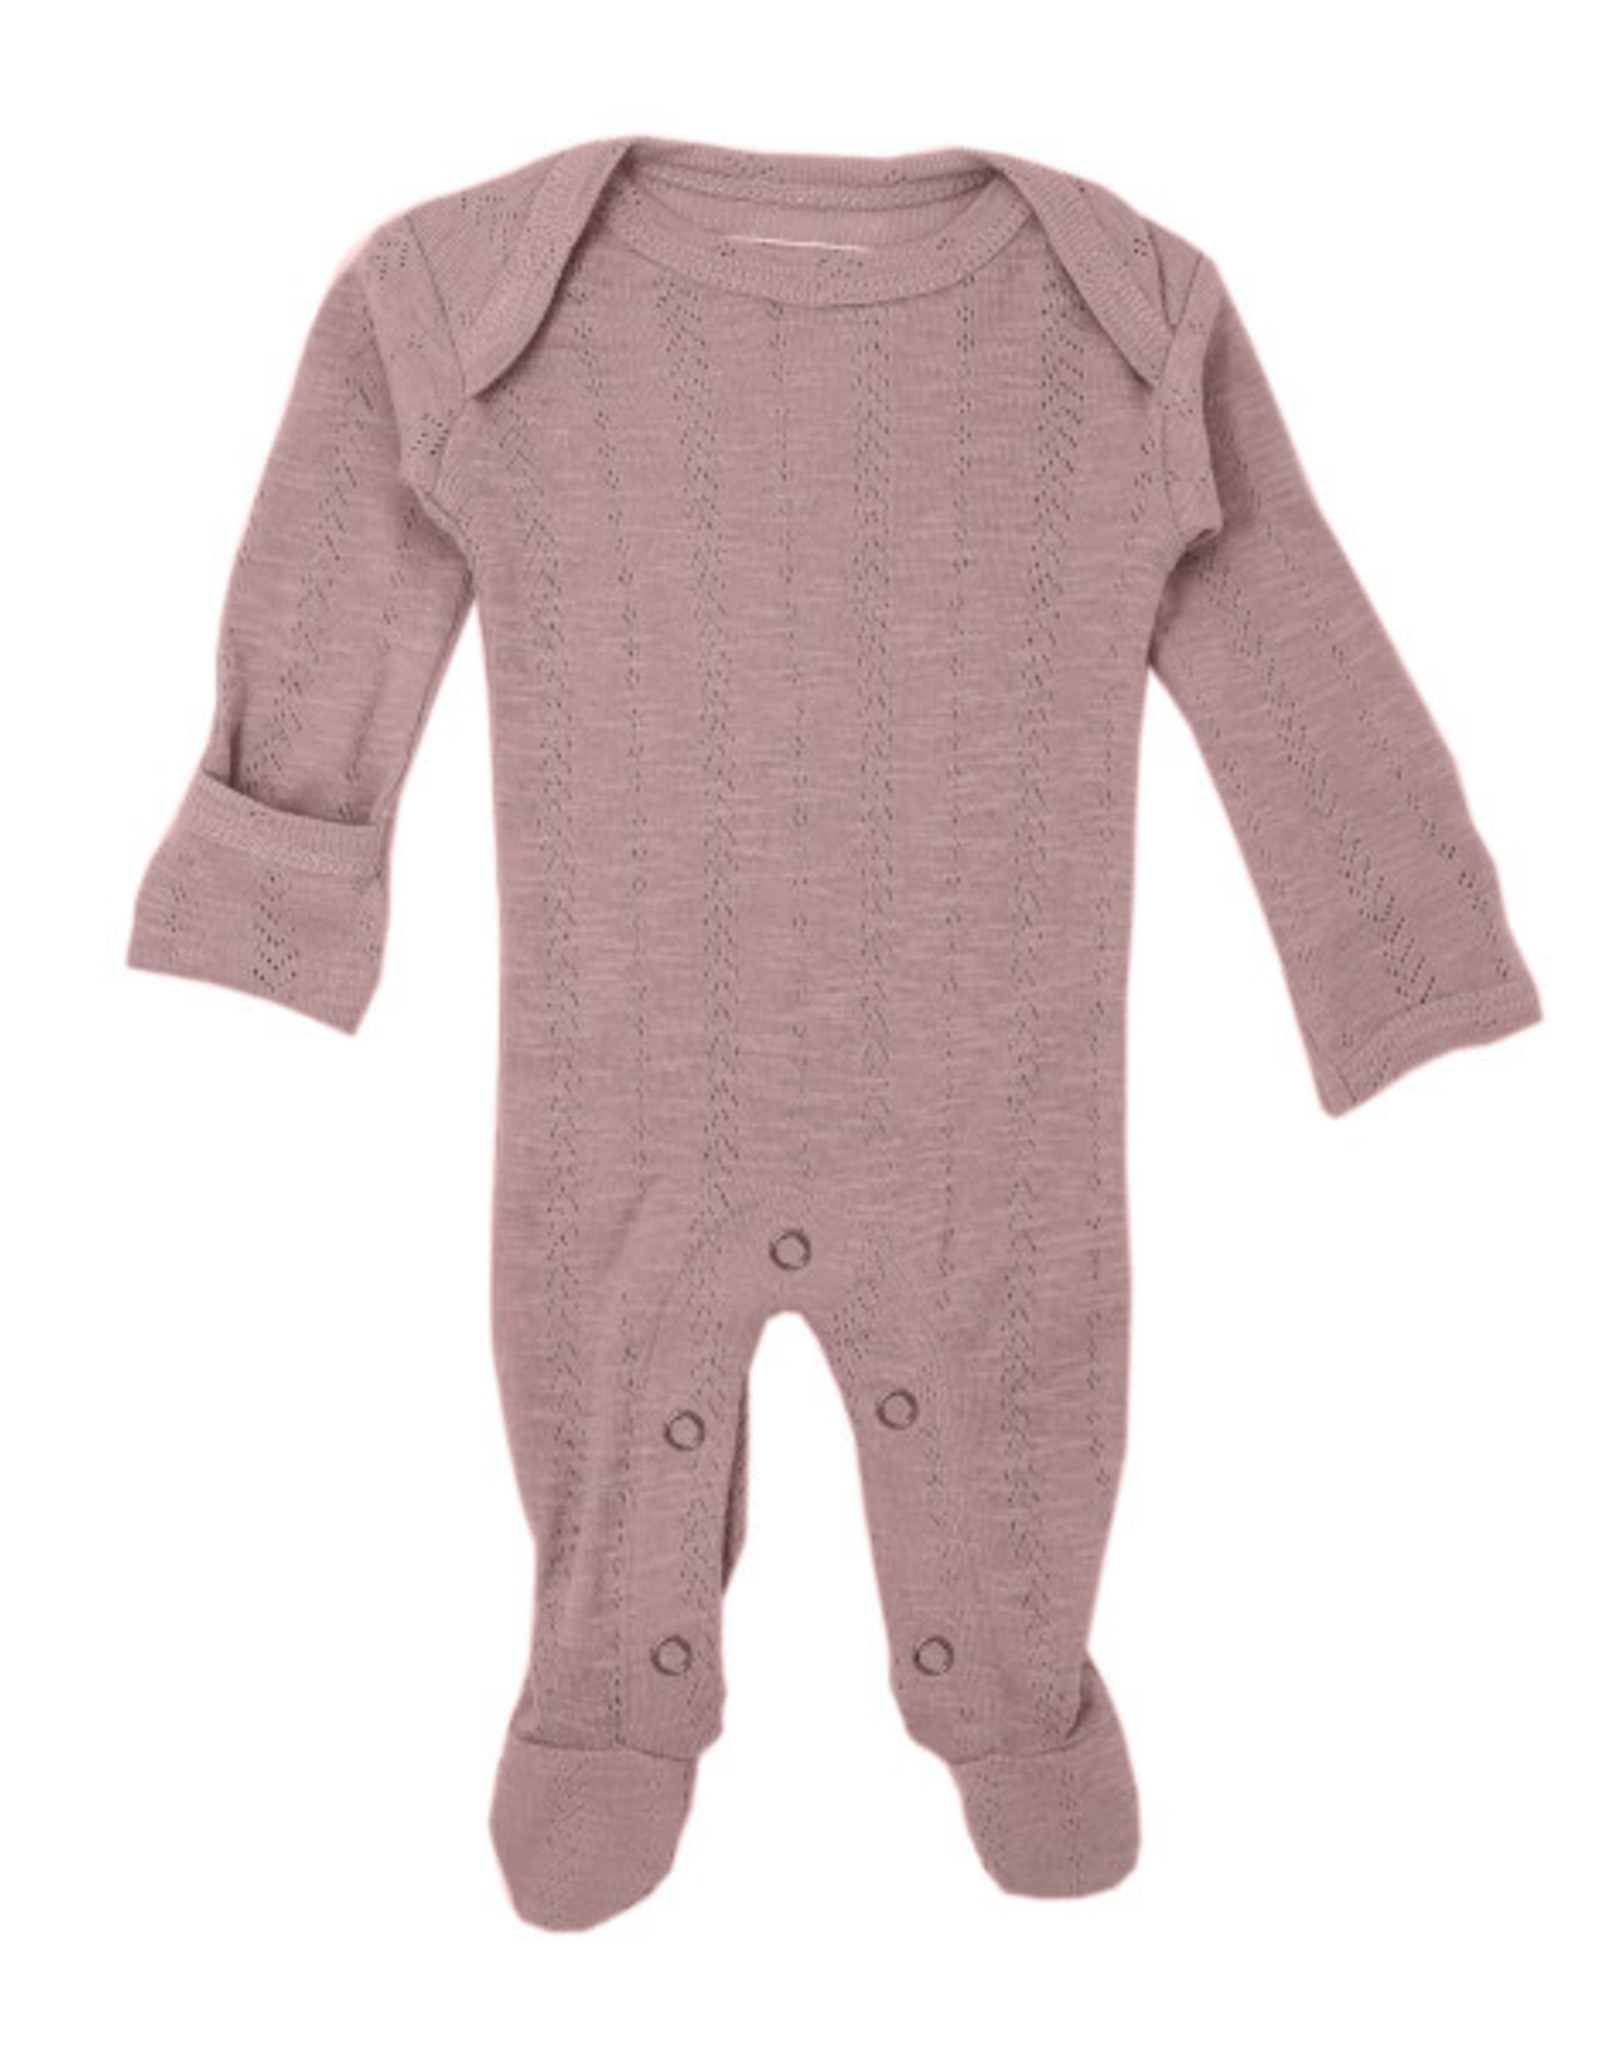 L'oved Baby Pointelle Footie Thistle